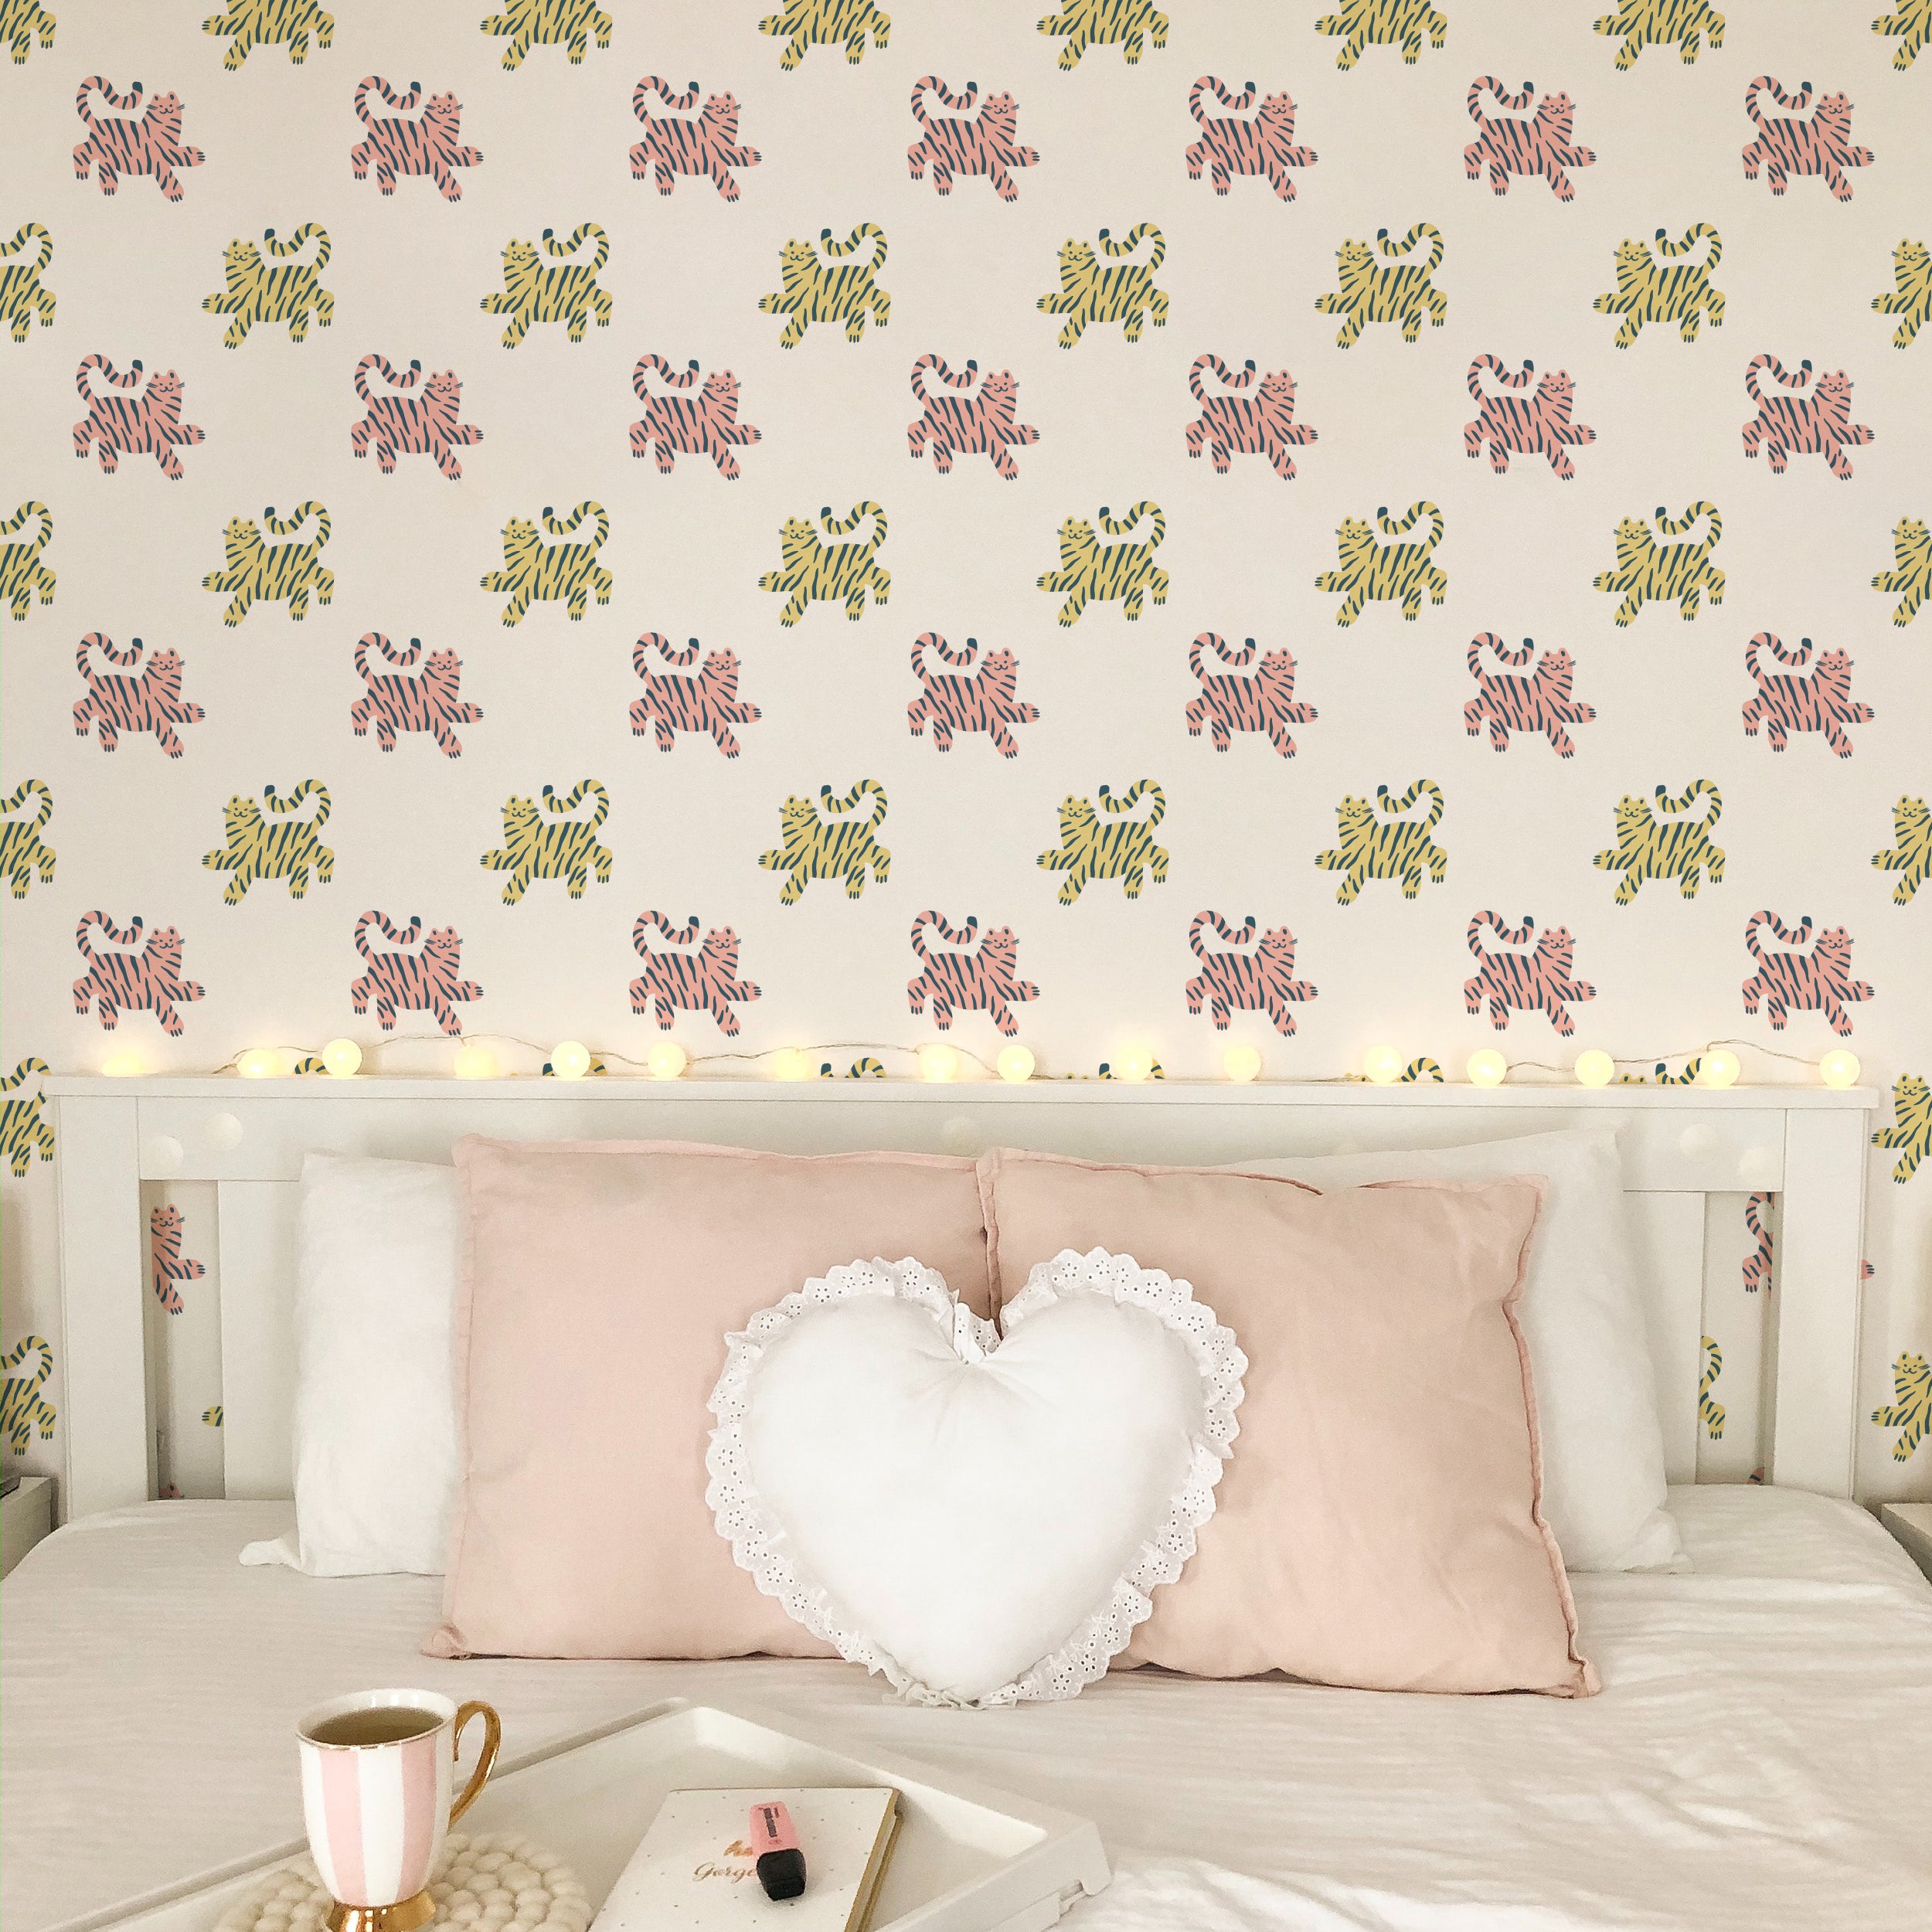 Charming children's room setup showcasing 'Cat Wallpaper 3' with leaping pink and yellow cats on the walls. The room is adorned with a heart-shaped white pillow and soft pink cushions, creating a warm and welcoming atmosphere